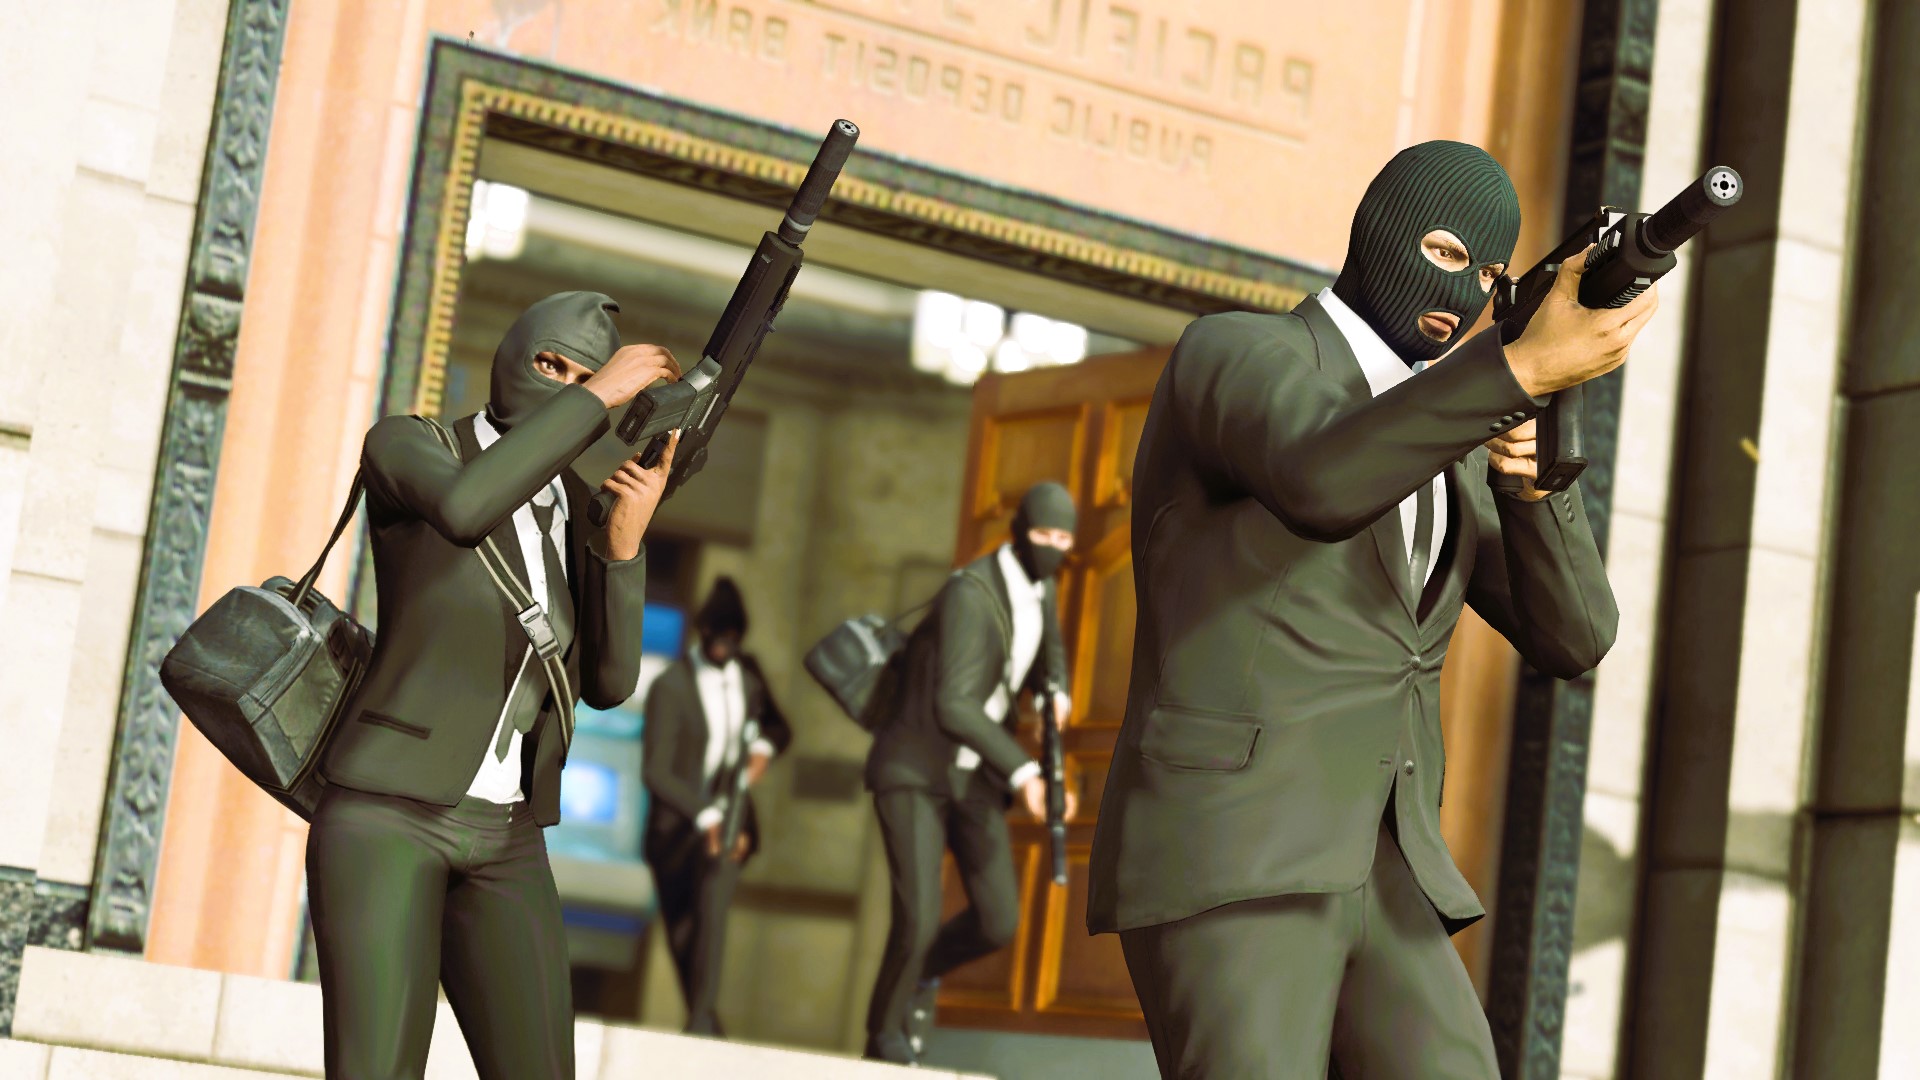 Missions in Grand Theft Auto V